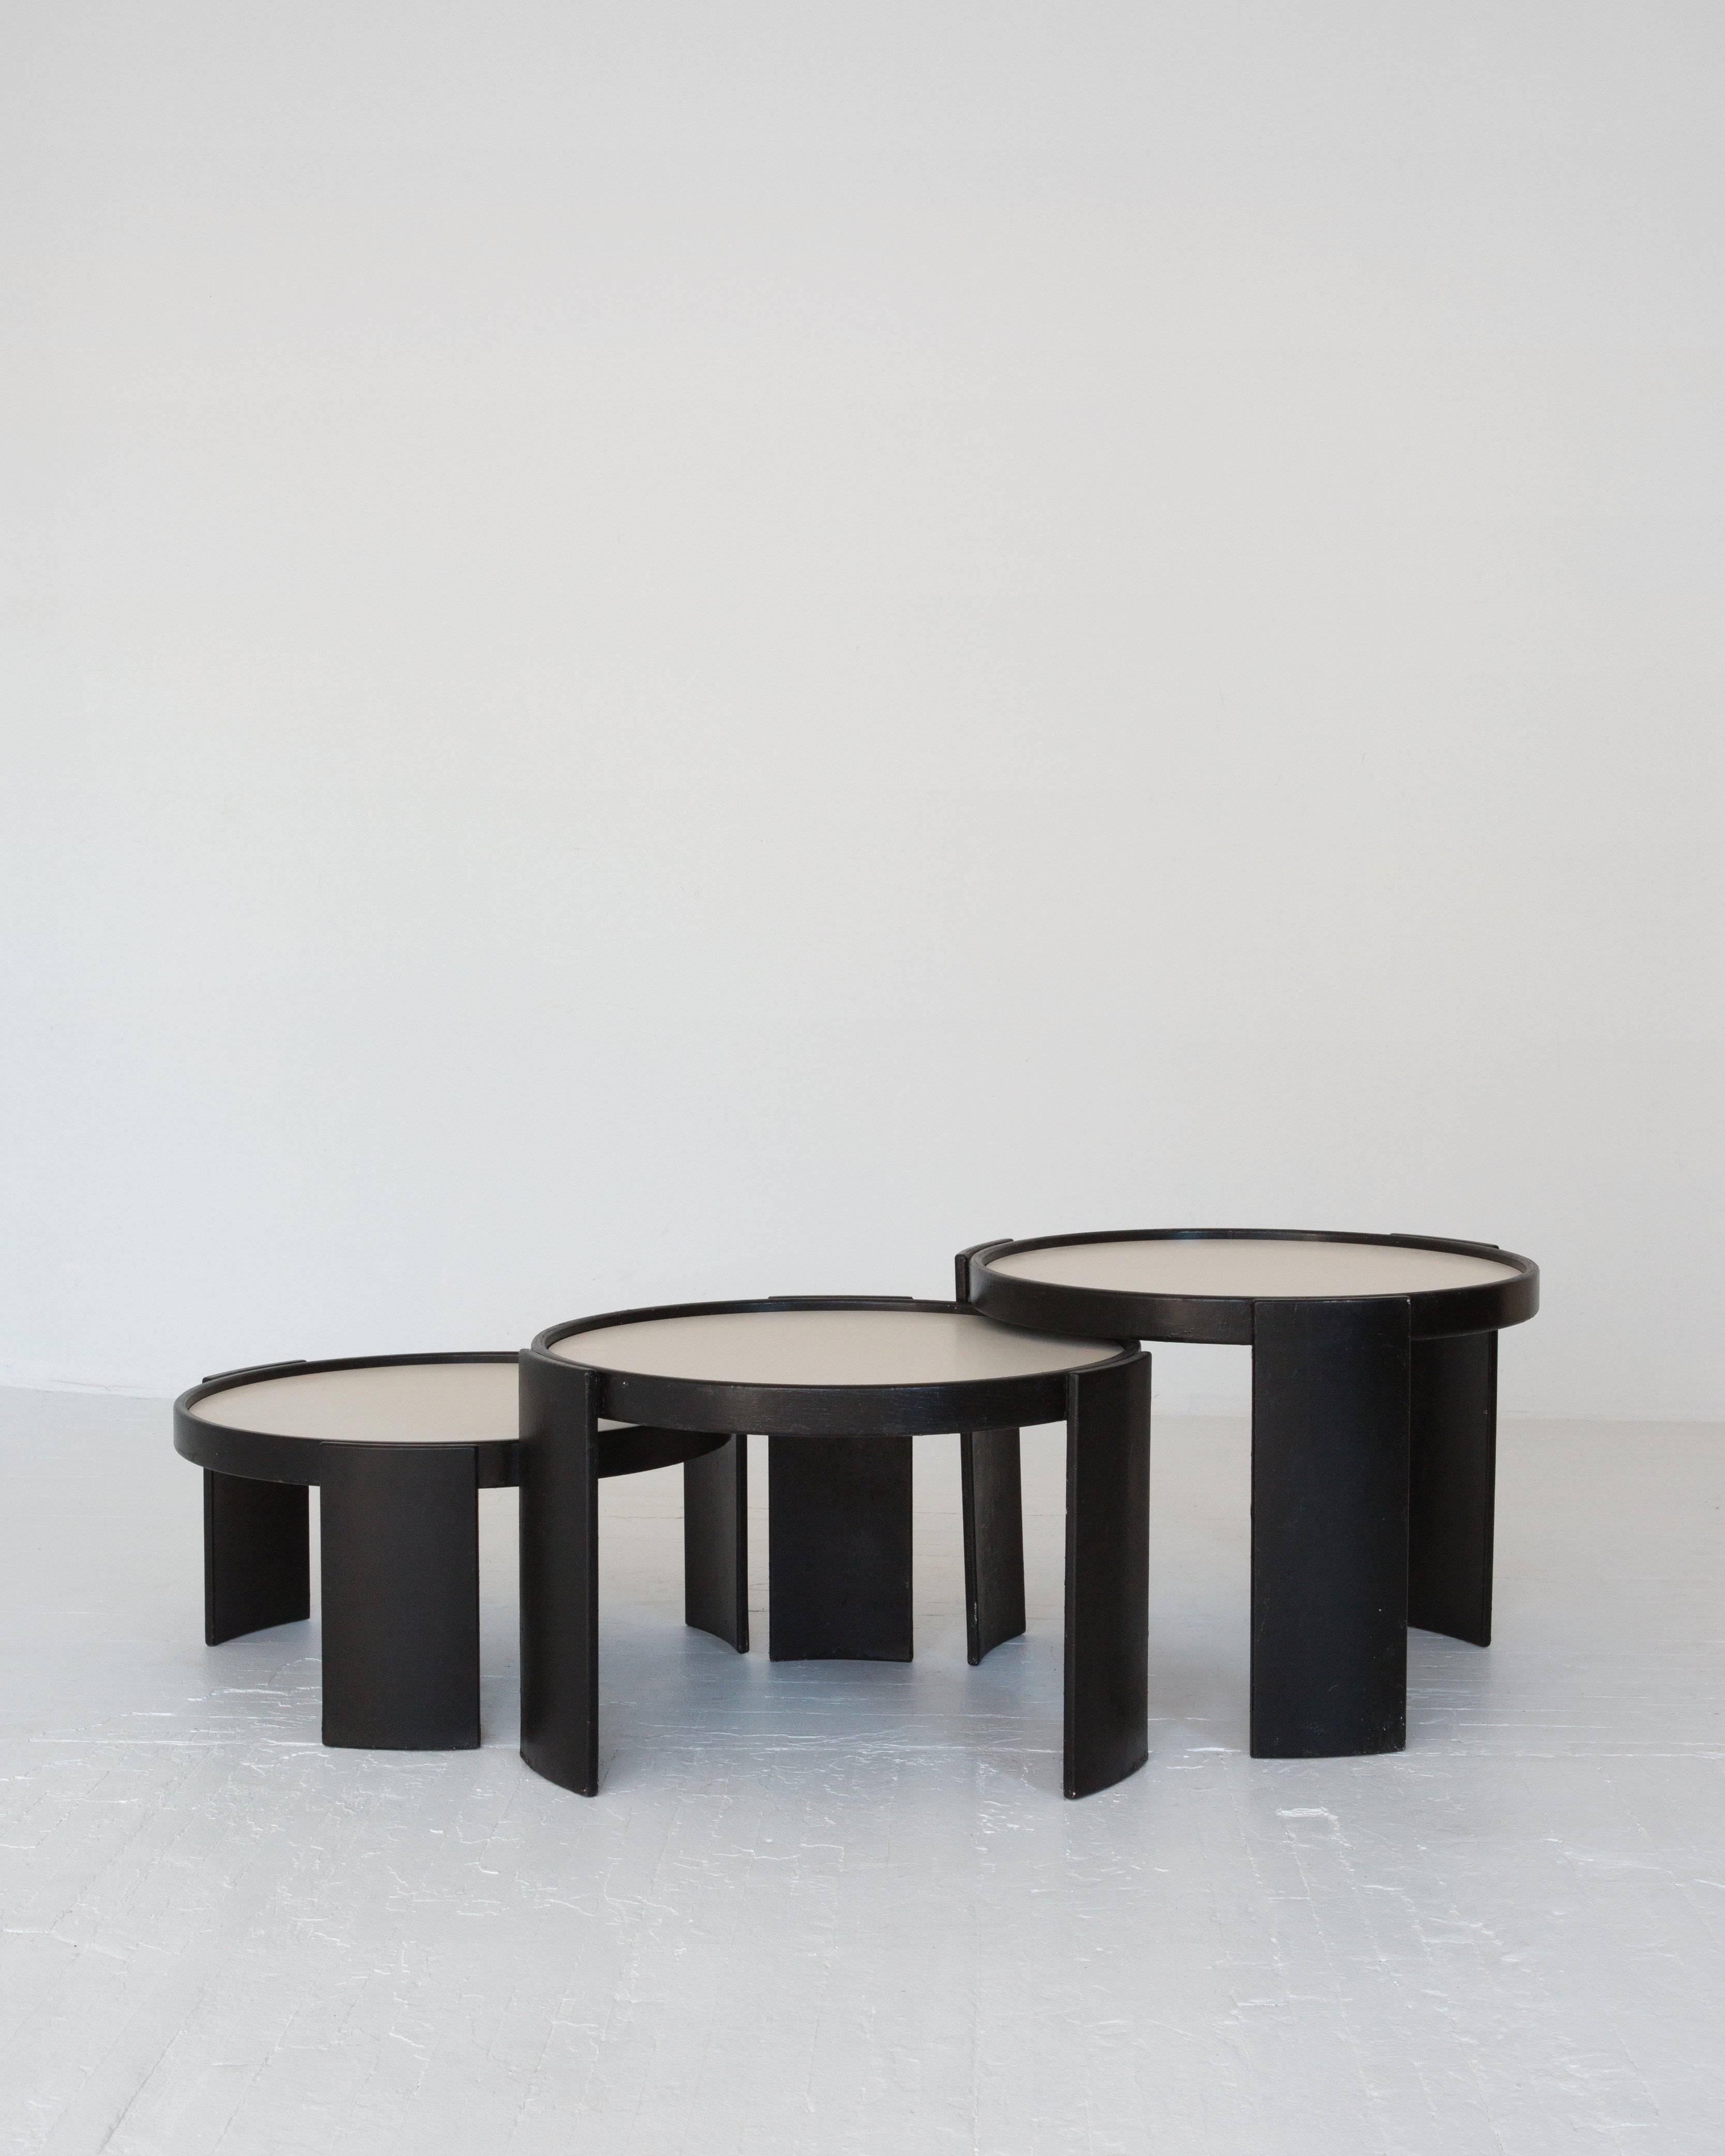 A set of black and white lacquered wood Gianfranco Frattini nesting tables. 

Measures: Smaller sizes: 15.25